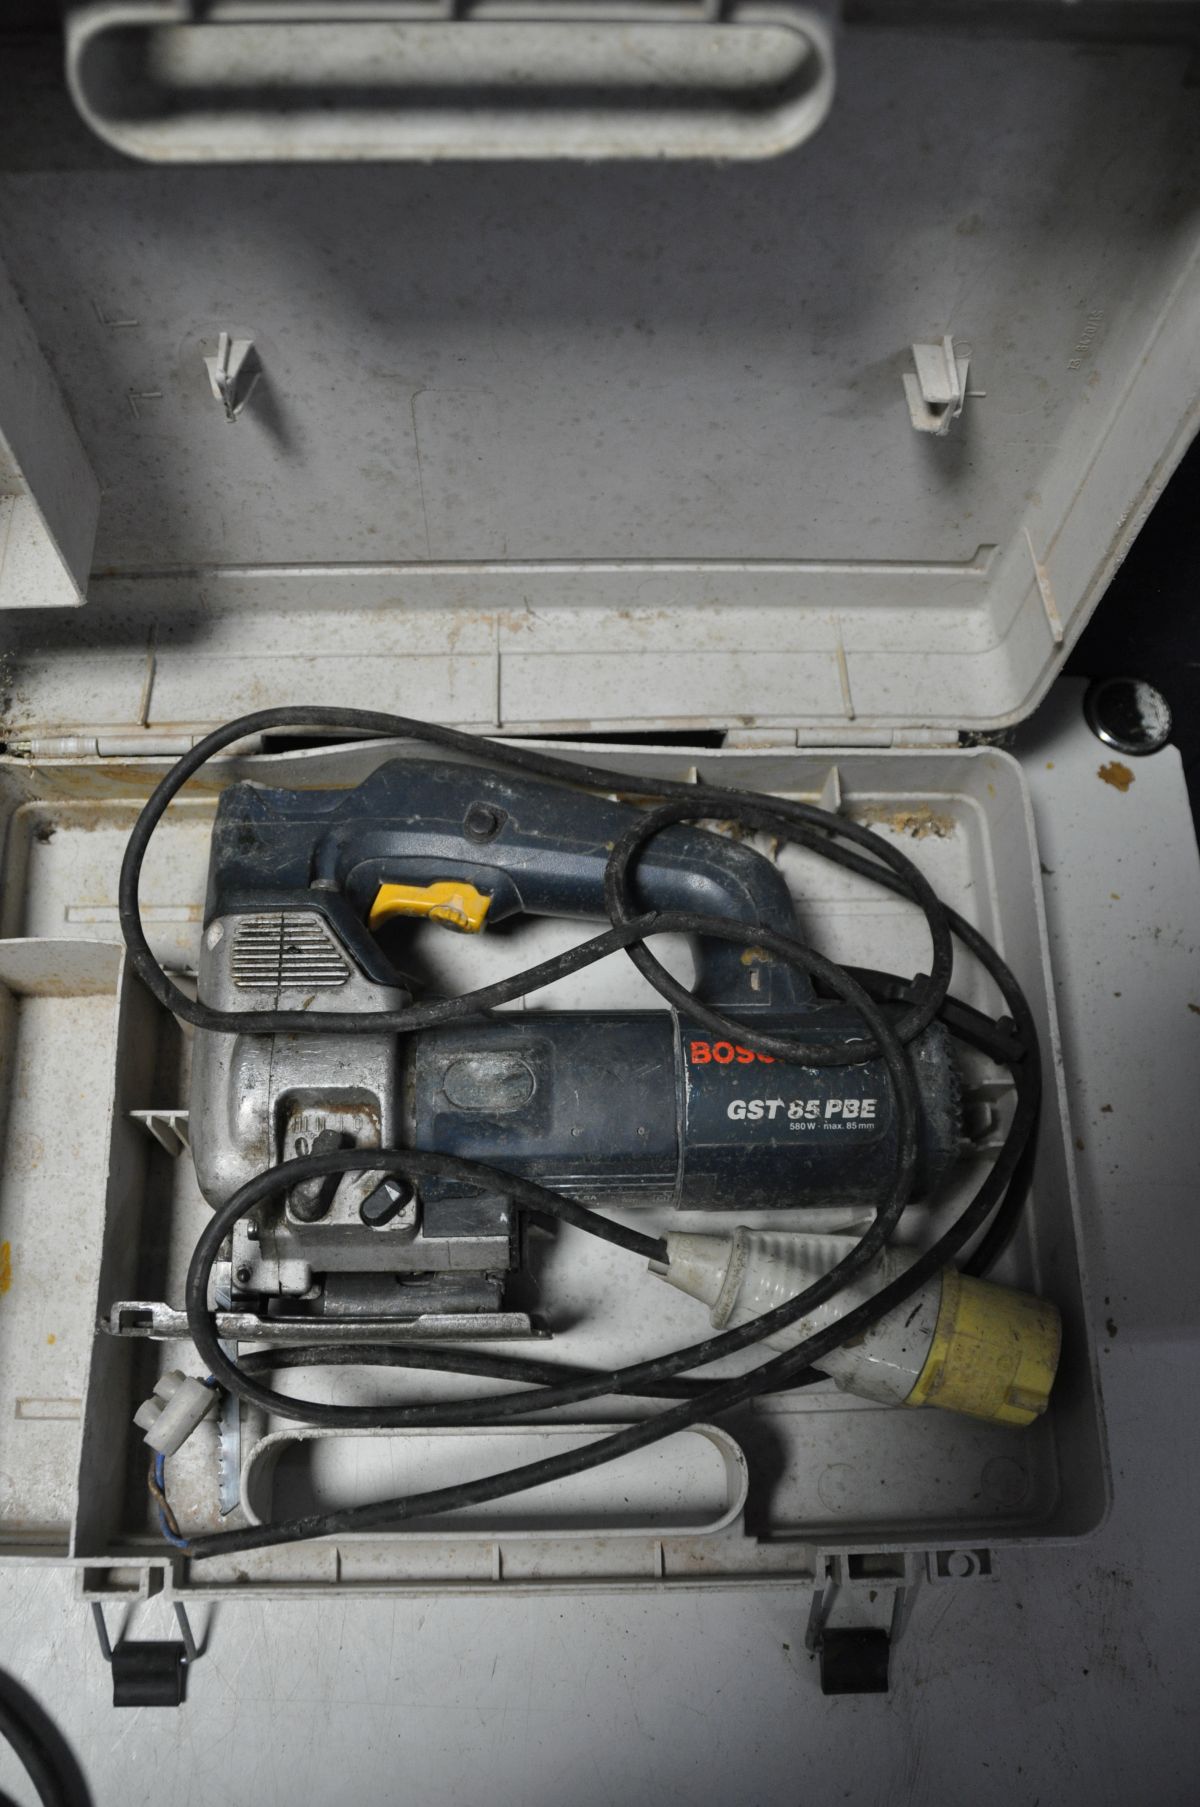 A COLLECTION OF POWERTOOLS to include a Bosch GST85 jigsaw, Bosch GDA280-E sander, Bosch - Image 4 of 5